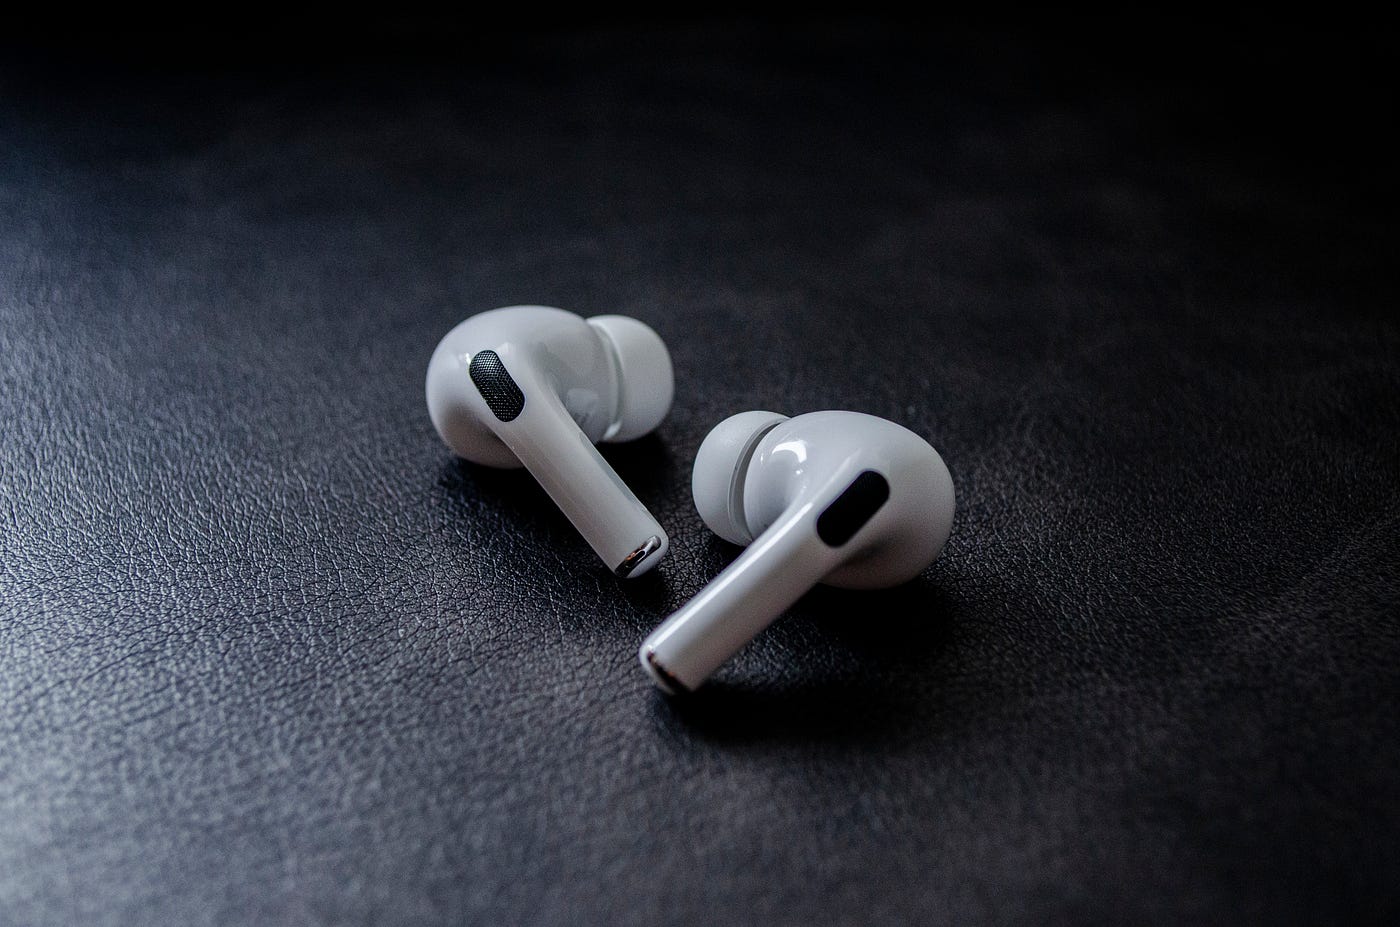 How did Apple build a solid pair of headphones for only $19?, by Tobias  Hedtke